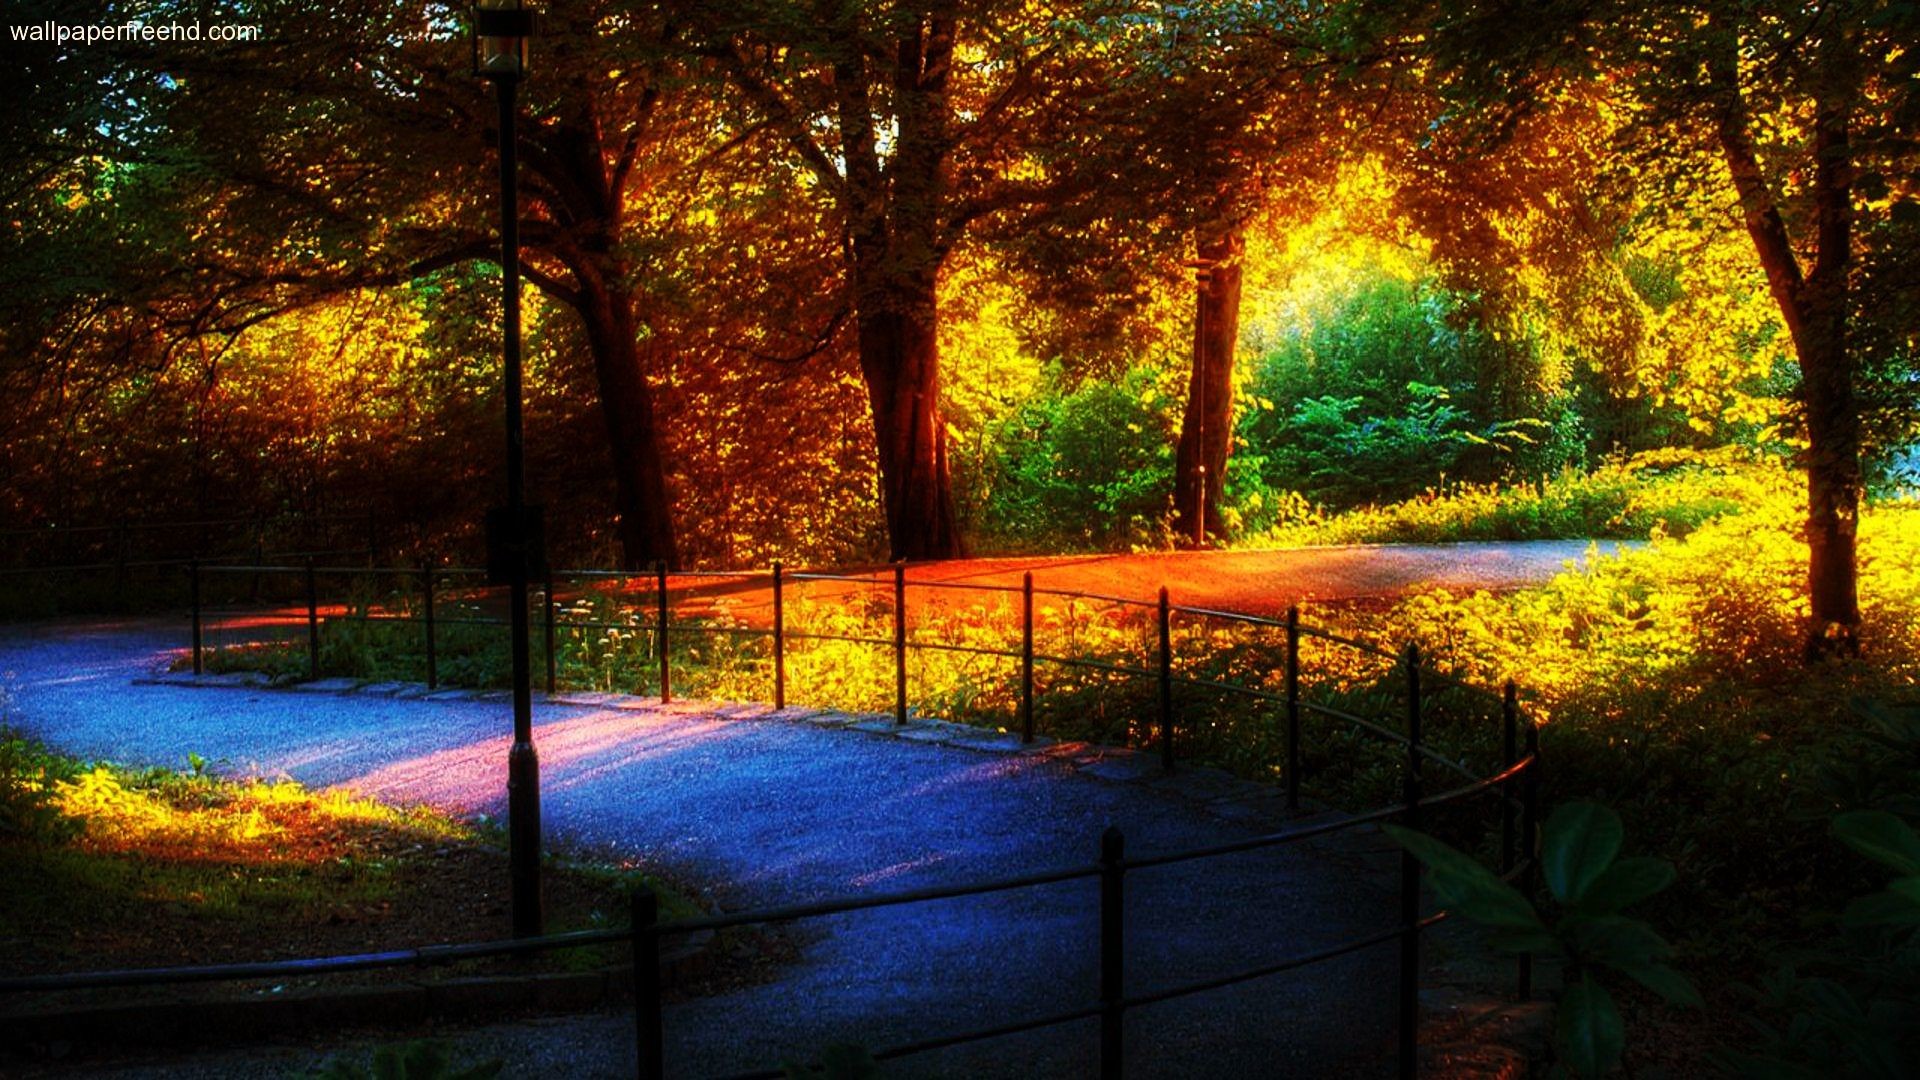 1920x1080 Amazing-Nature-Wallpaper-Rainbow-in-The-Park-1080p-